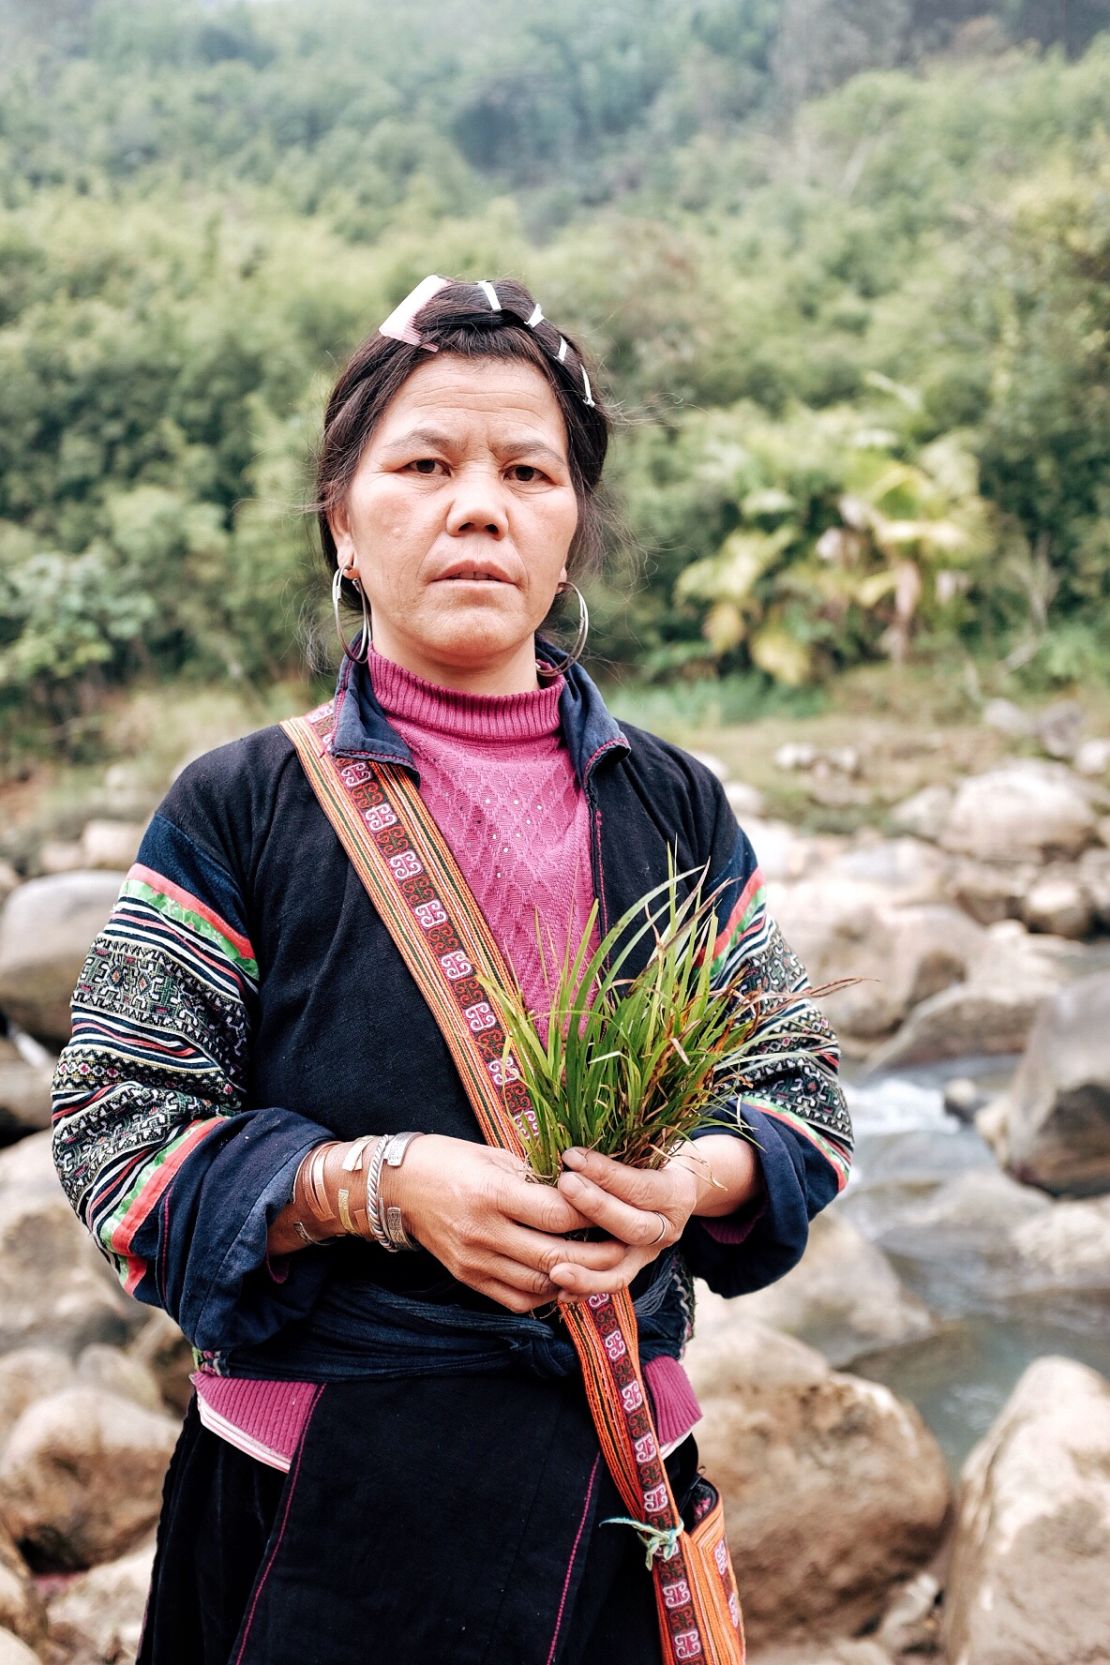 Sung Thi May, a member of the Hmong community, harvests herbs for Skinlosophy's shampoos.